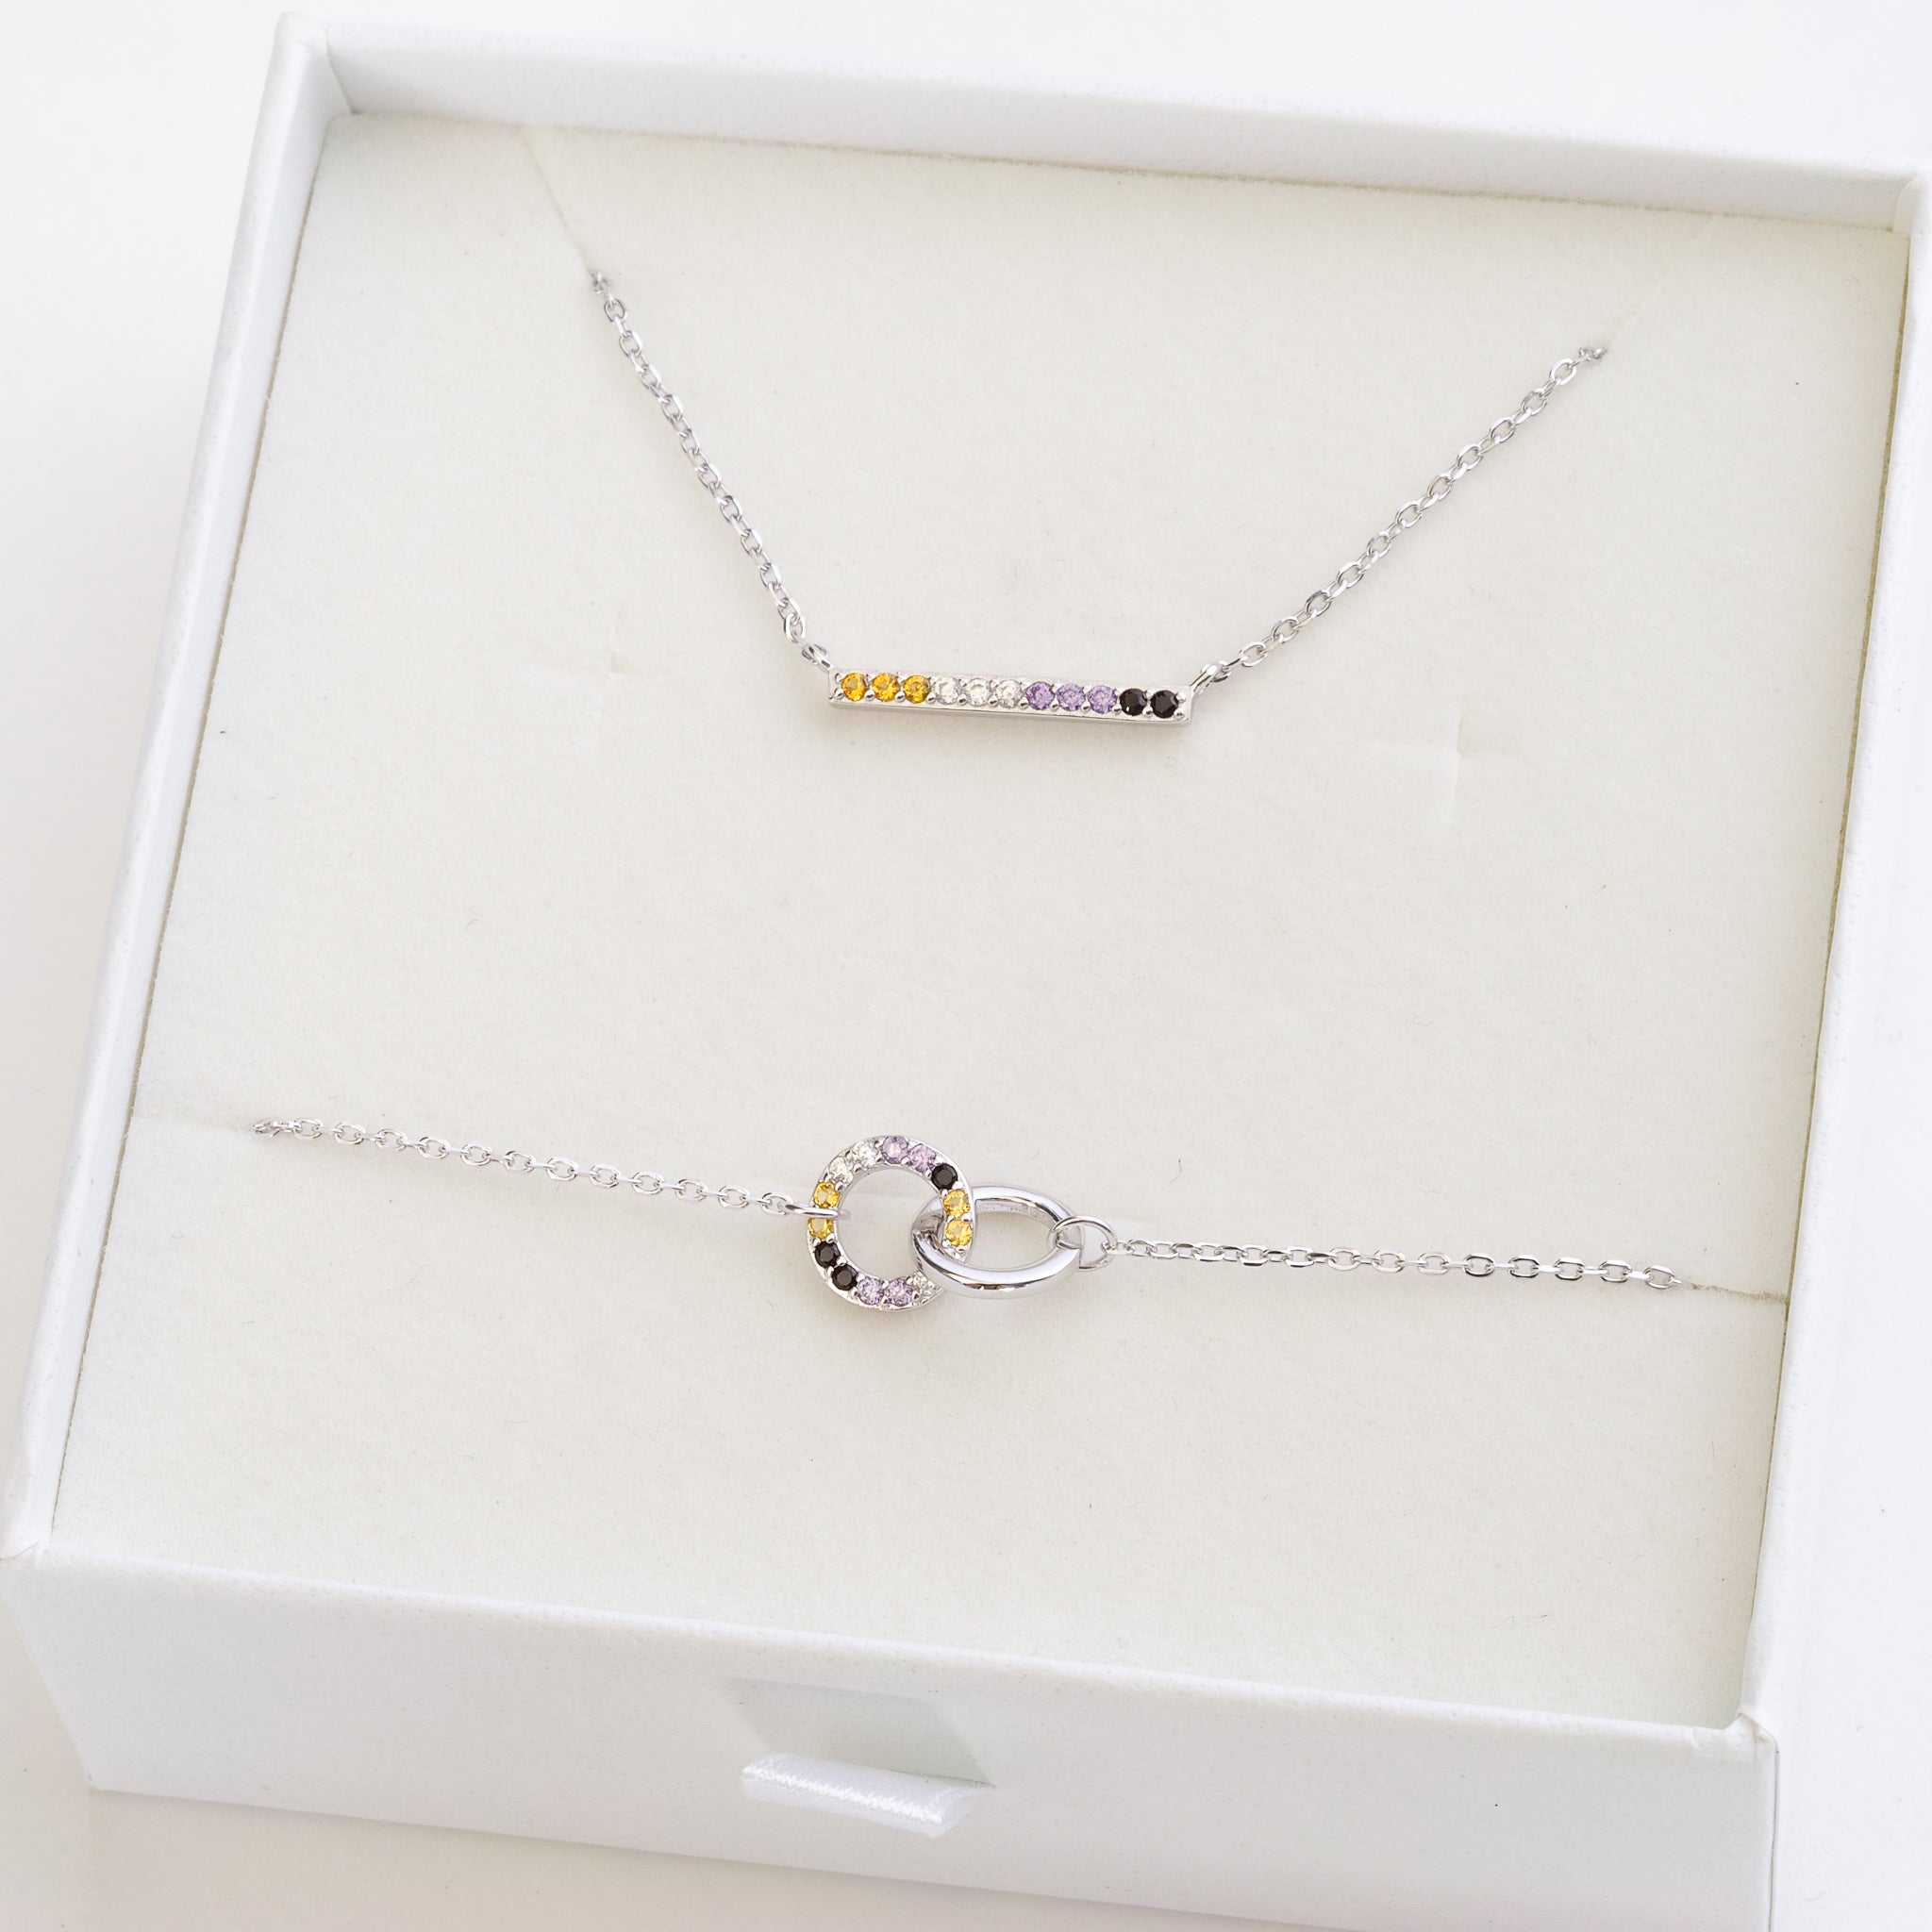 non-binary flag jewellery set with non-binary necklace and non-binary bracelet - silver